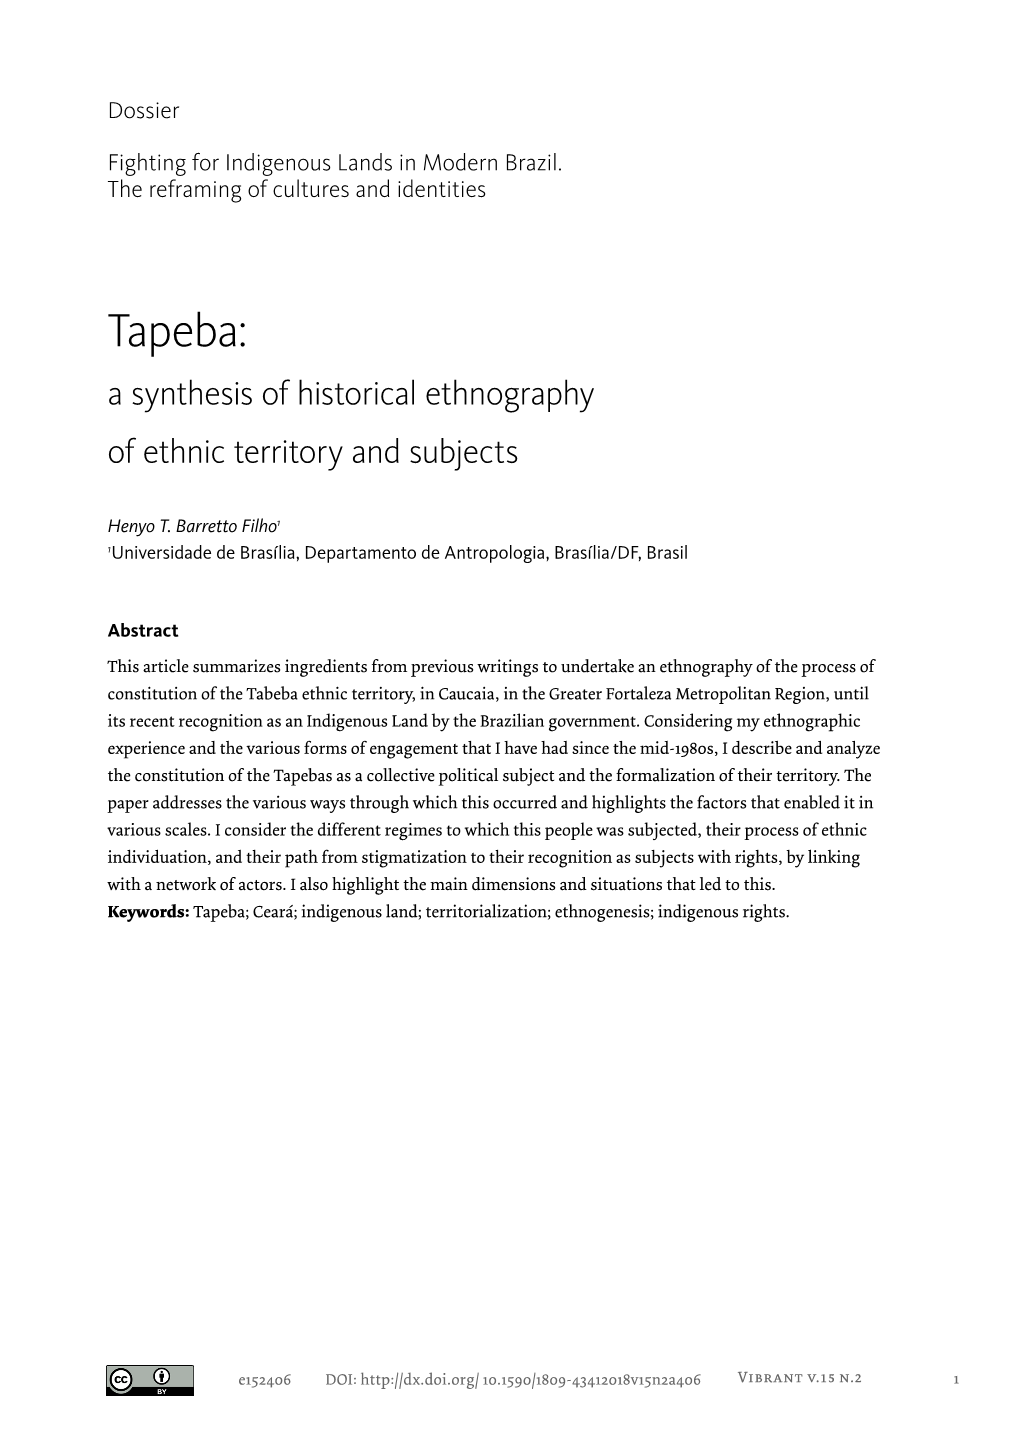 Tapeba: a Synthesis of Historical Ethnography of Ethnic Territory and Subjects